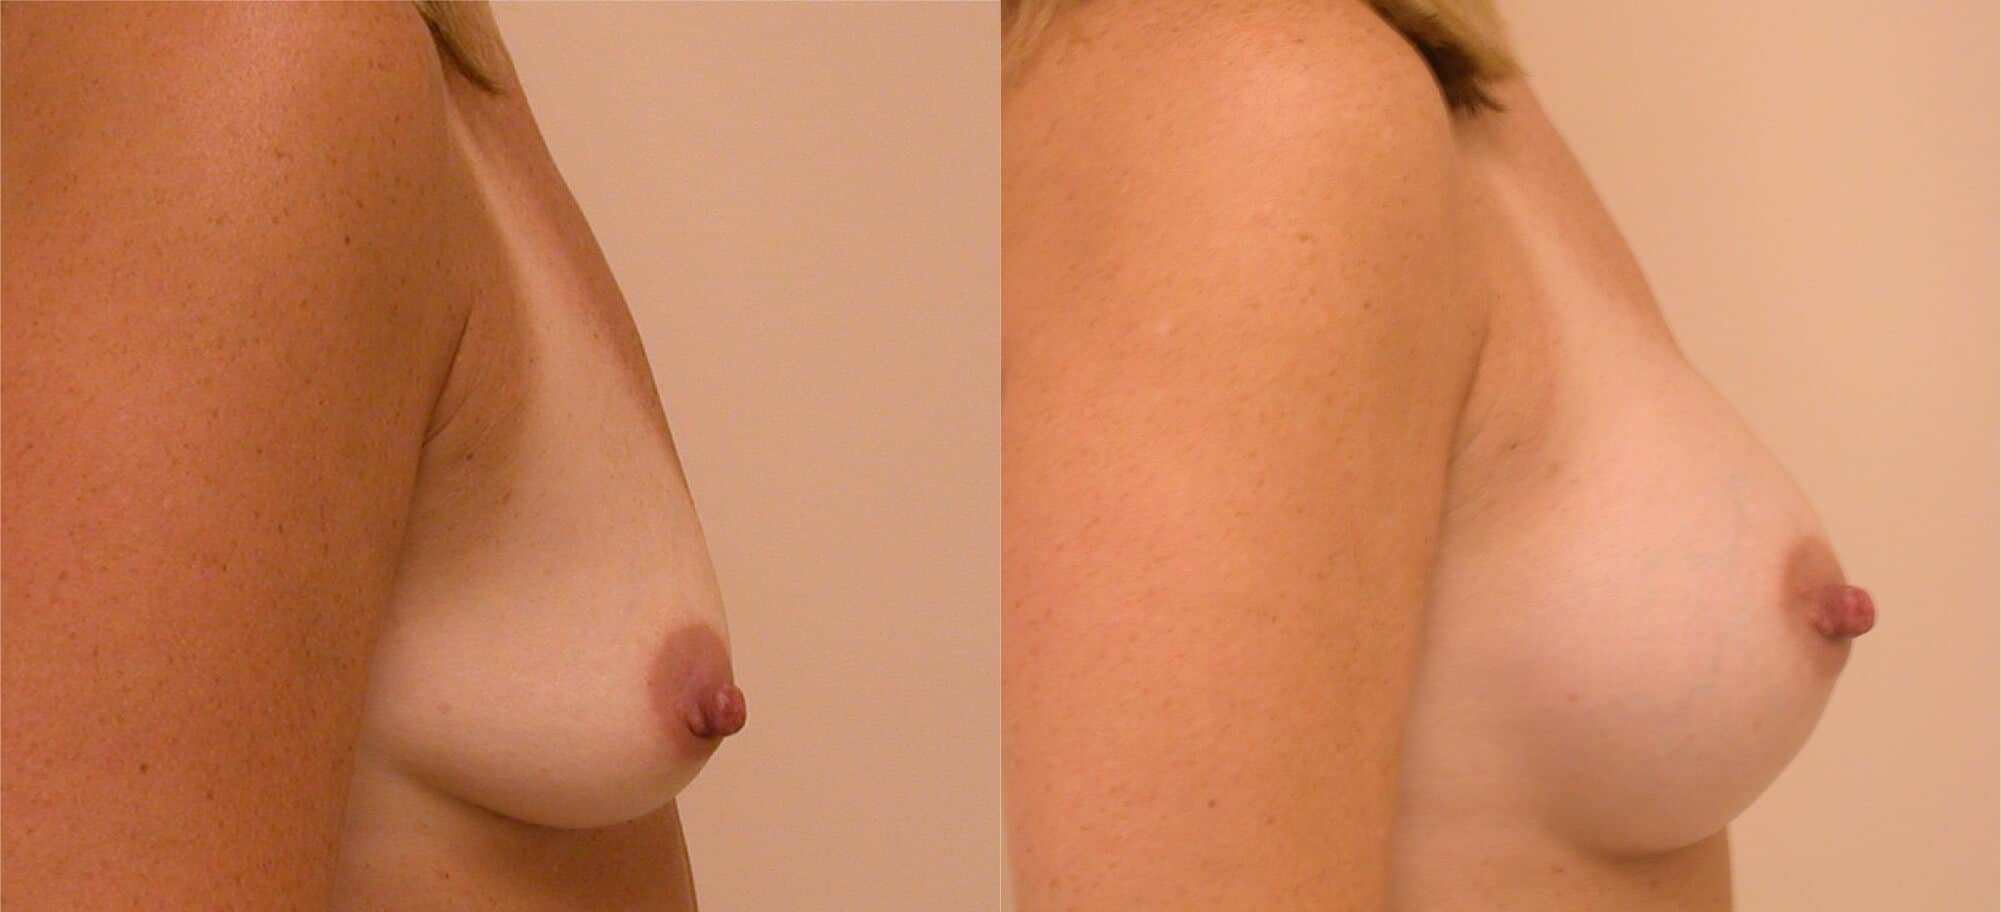 Before and After Keller Funnel Breast Augmentation Boston